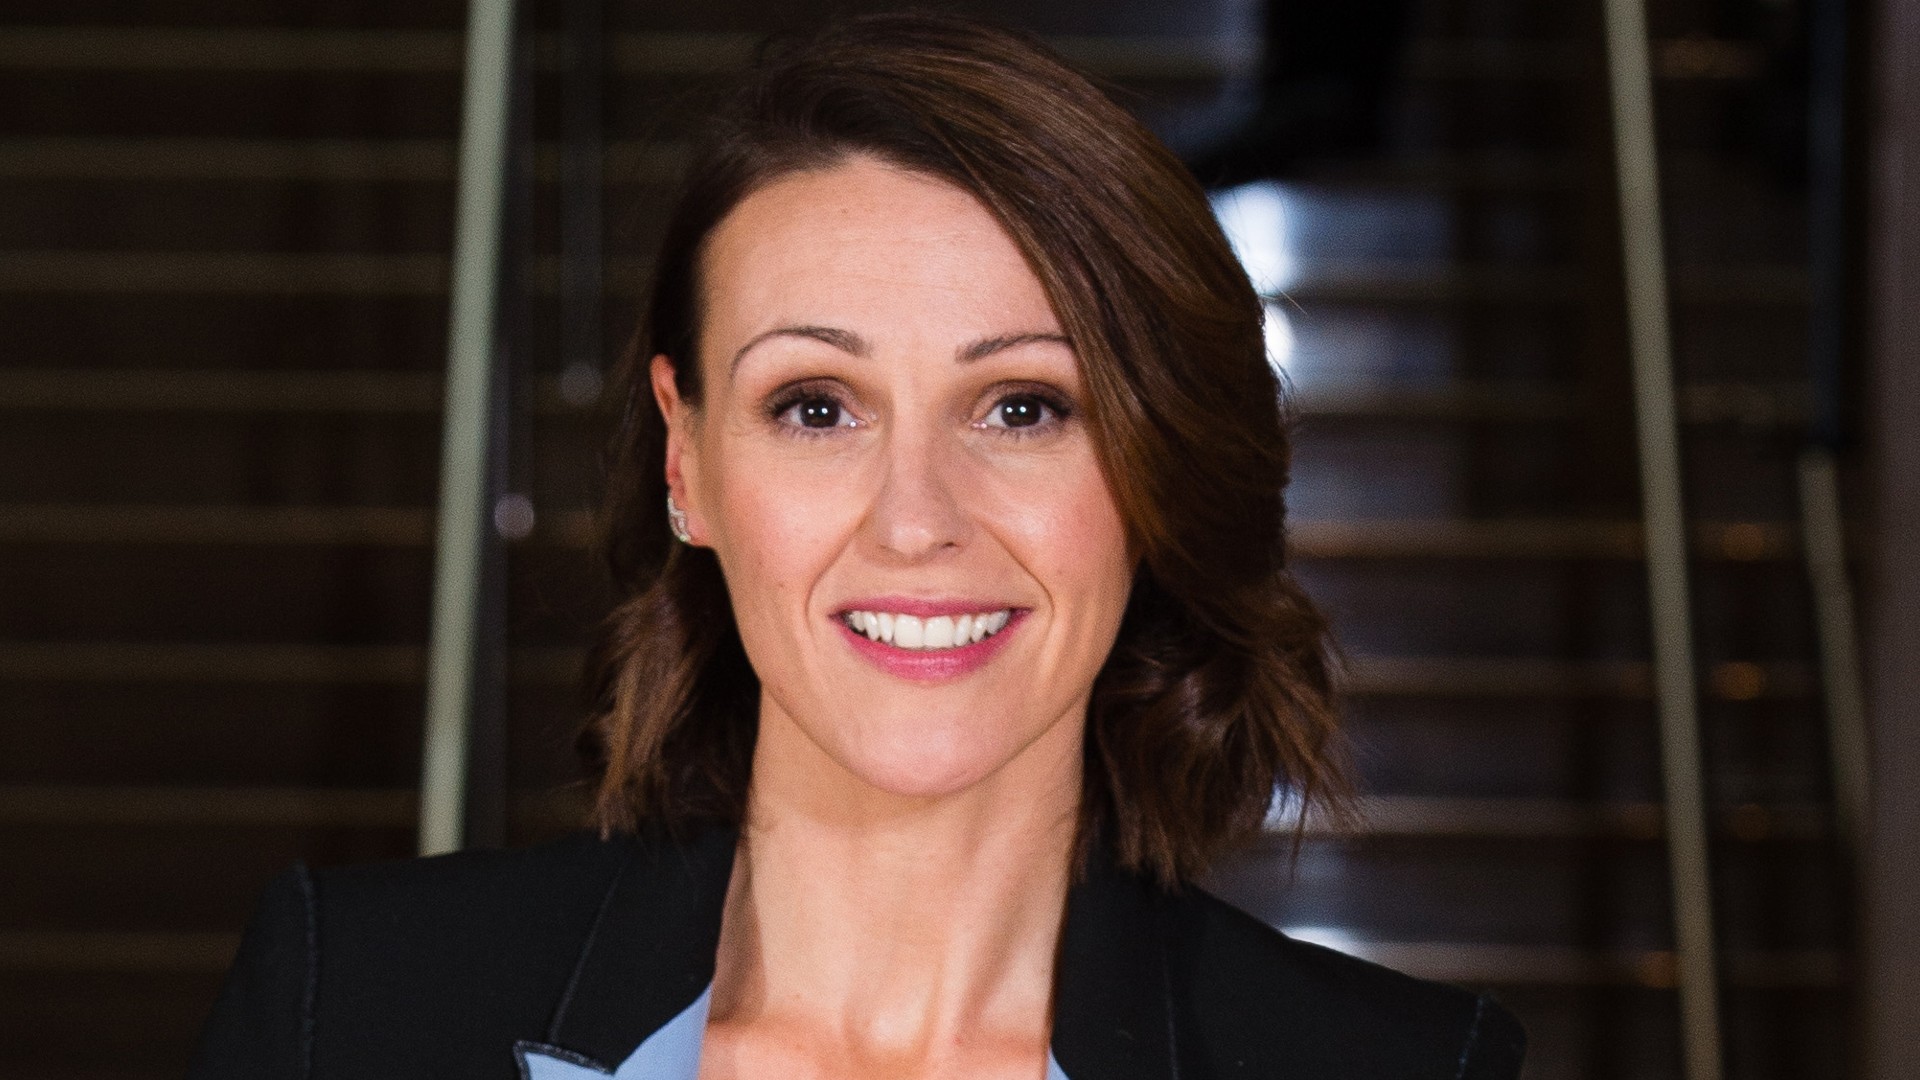 Casting News: Suranne Jones to Star in Sibling Drama Series 'Maryland'